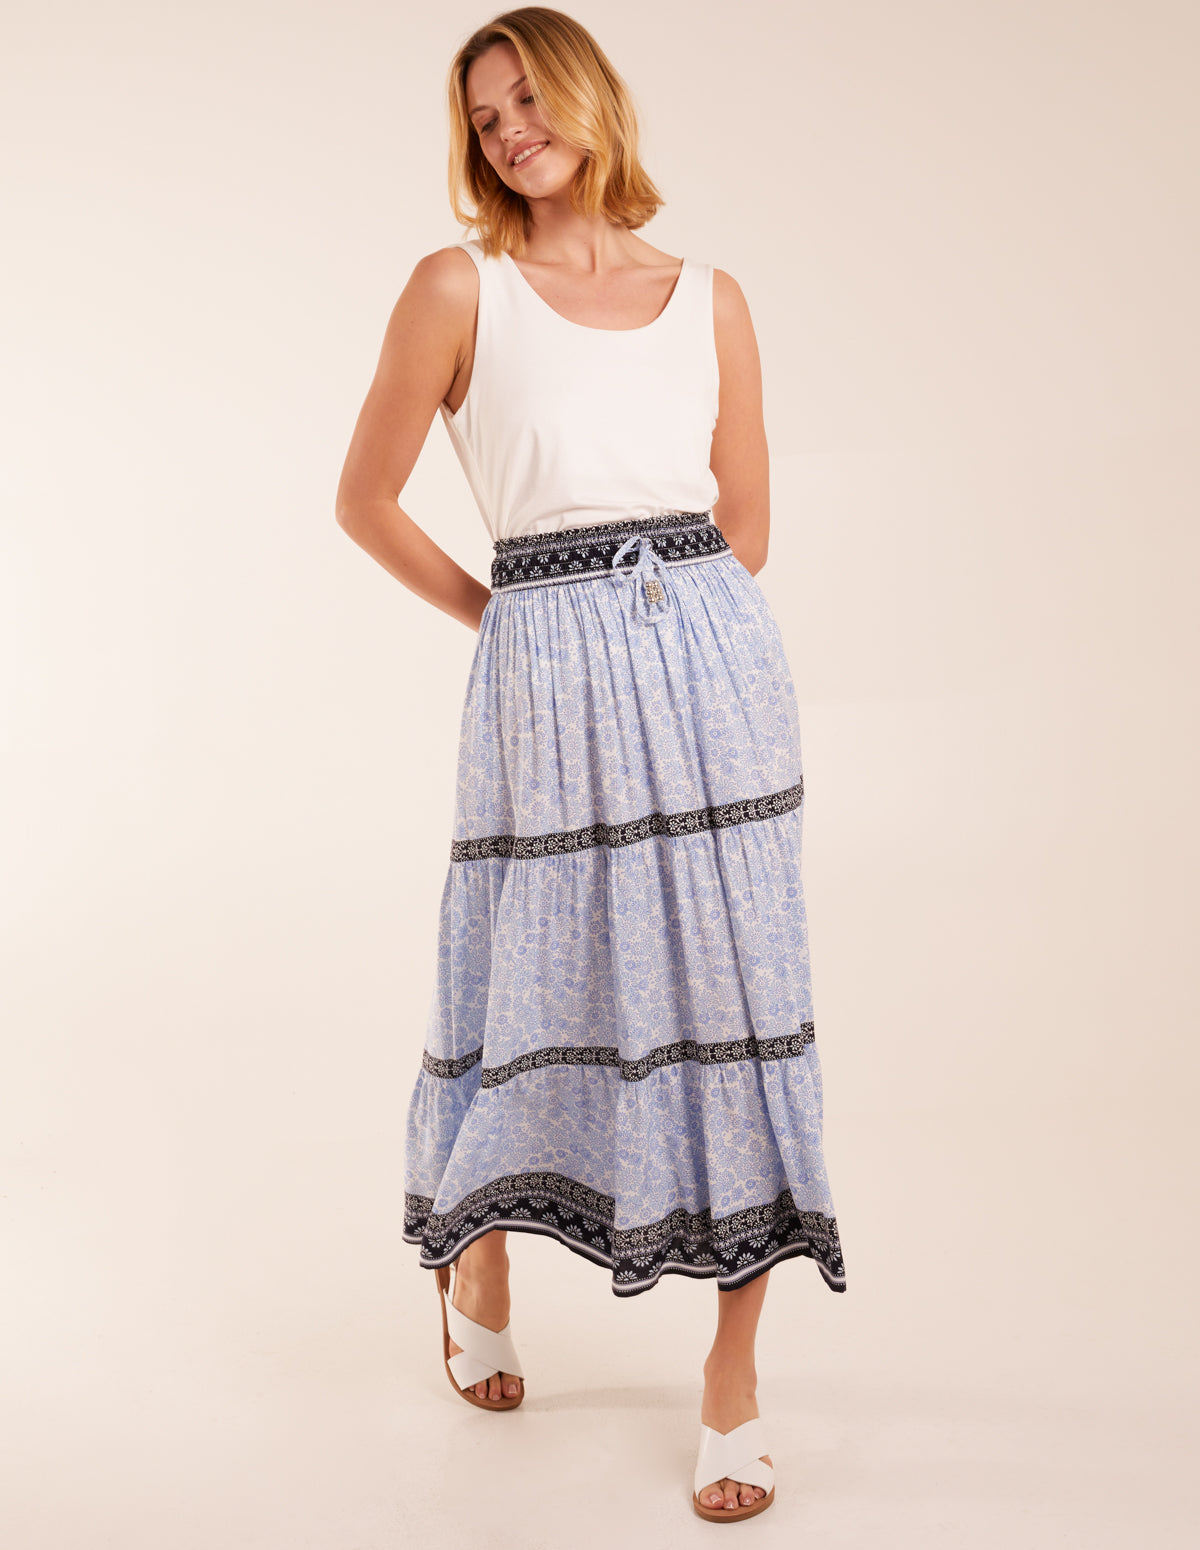 Contrast Printed Tiered Skirt 